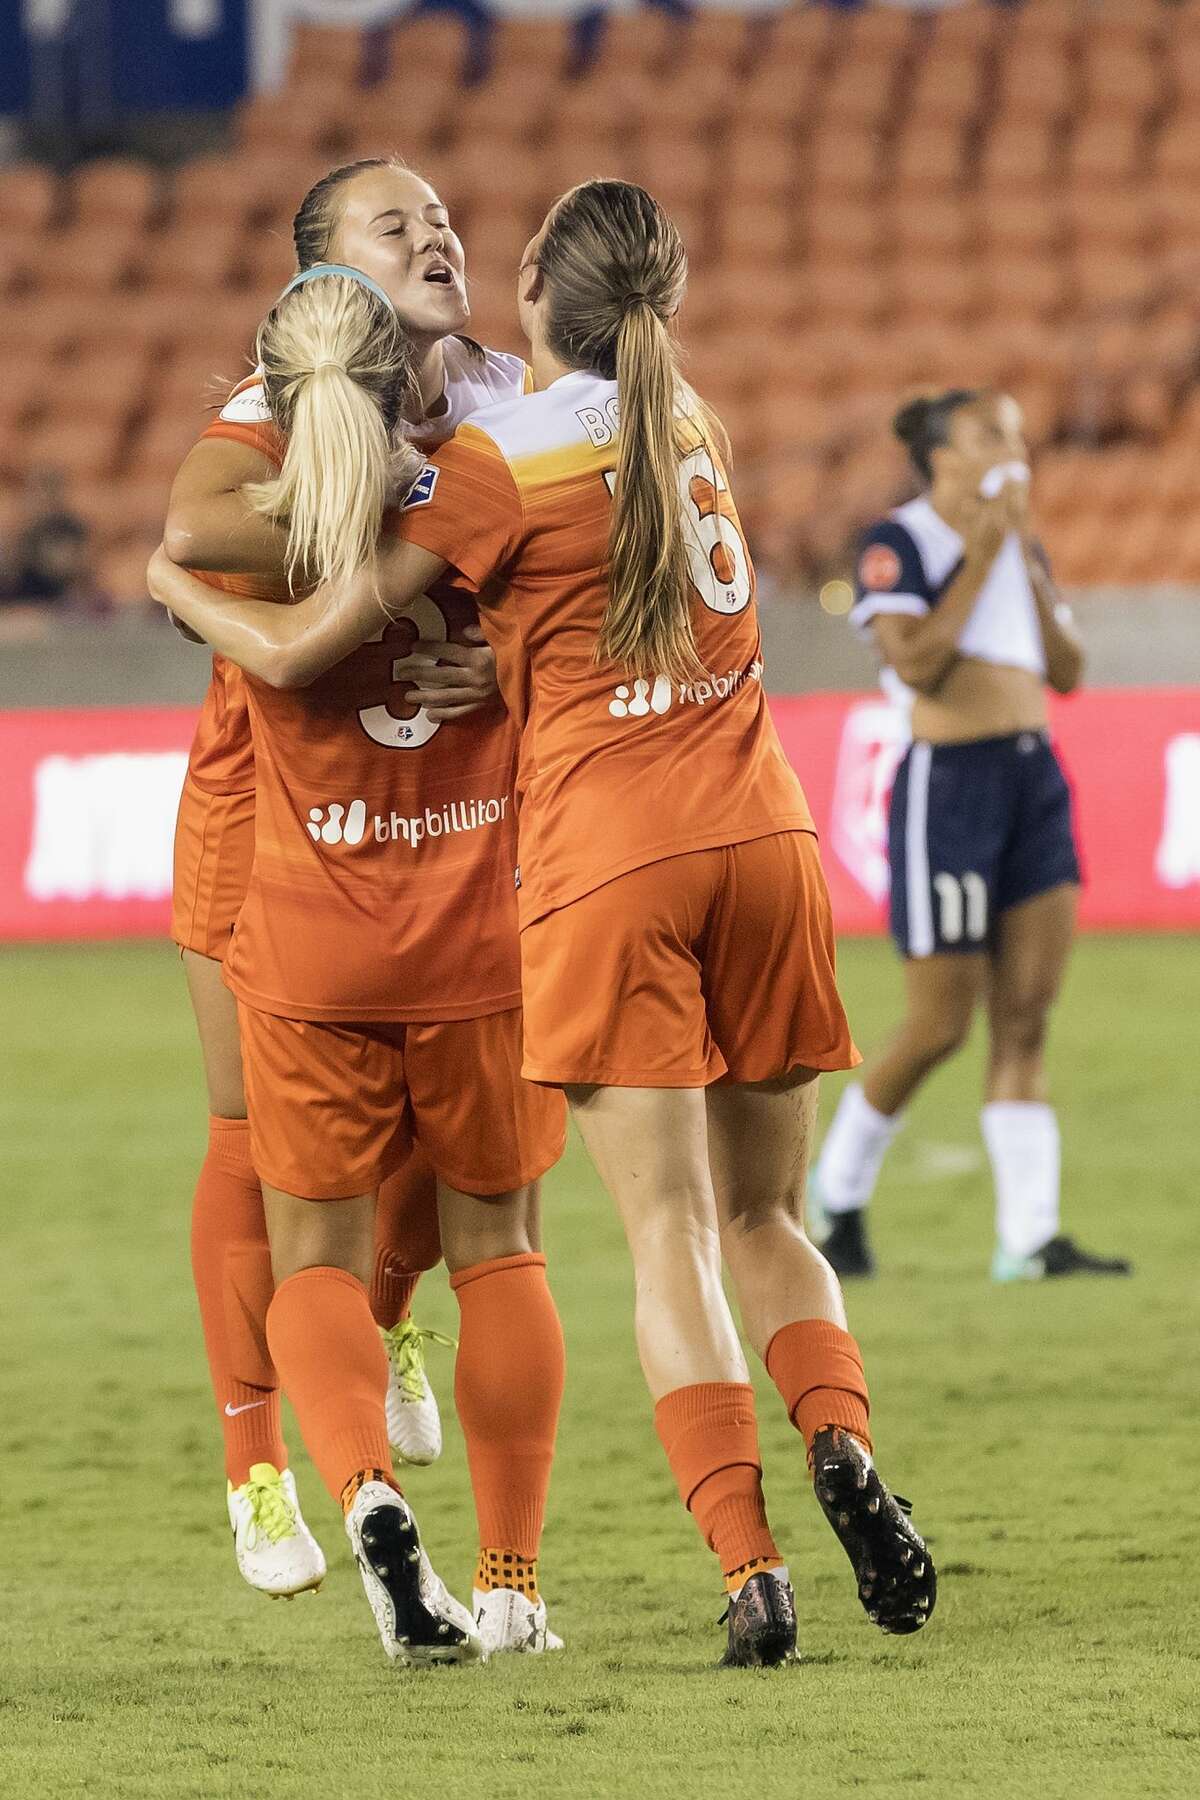 Houston Dash forward Janine Beckie (16) and forward Rachel Daly (3) celebrate with midfielder Andressa Cavalari Machry (17) after a goal in the second half during the NWSL game between the Washington Spirit and Houston Dash on Saturday July 15, 2017. The Dash defeated the Spirit 2-1.